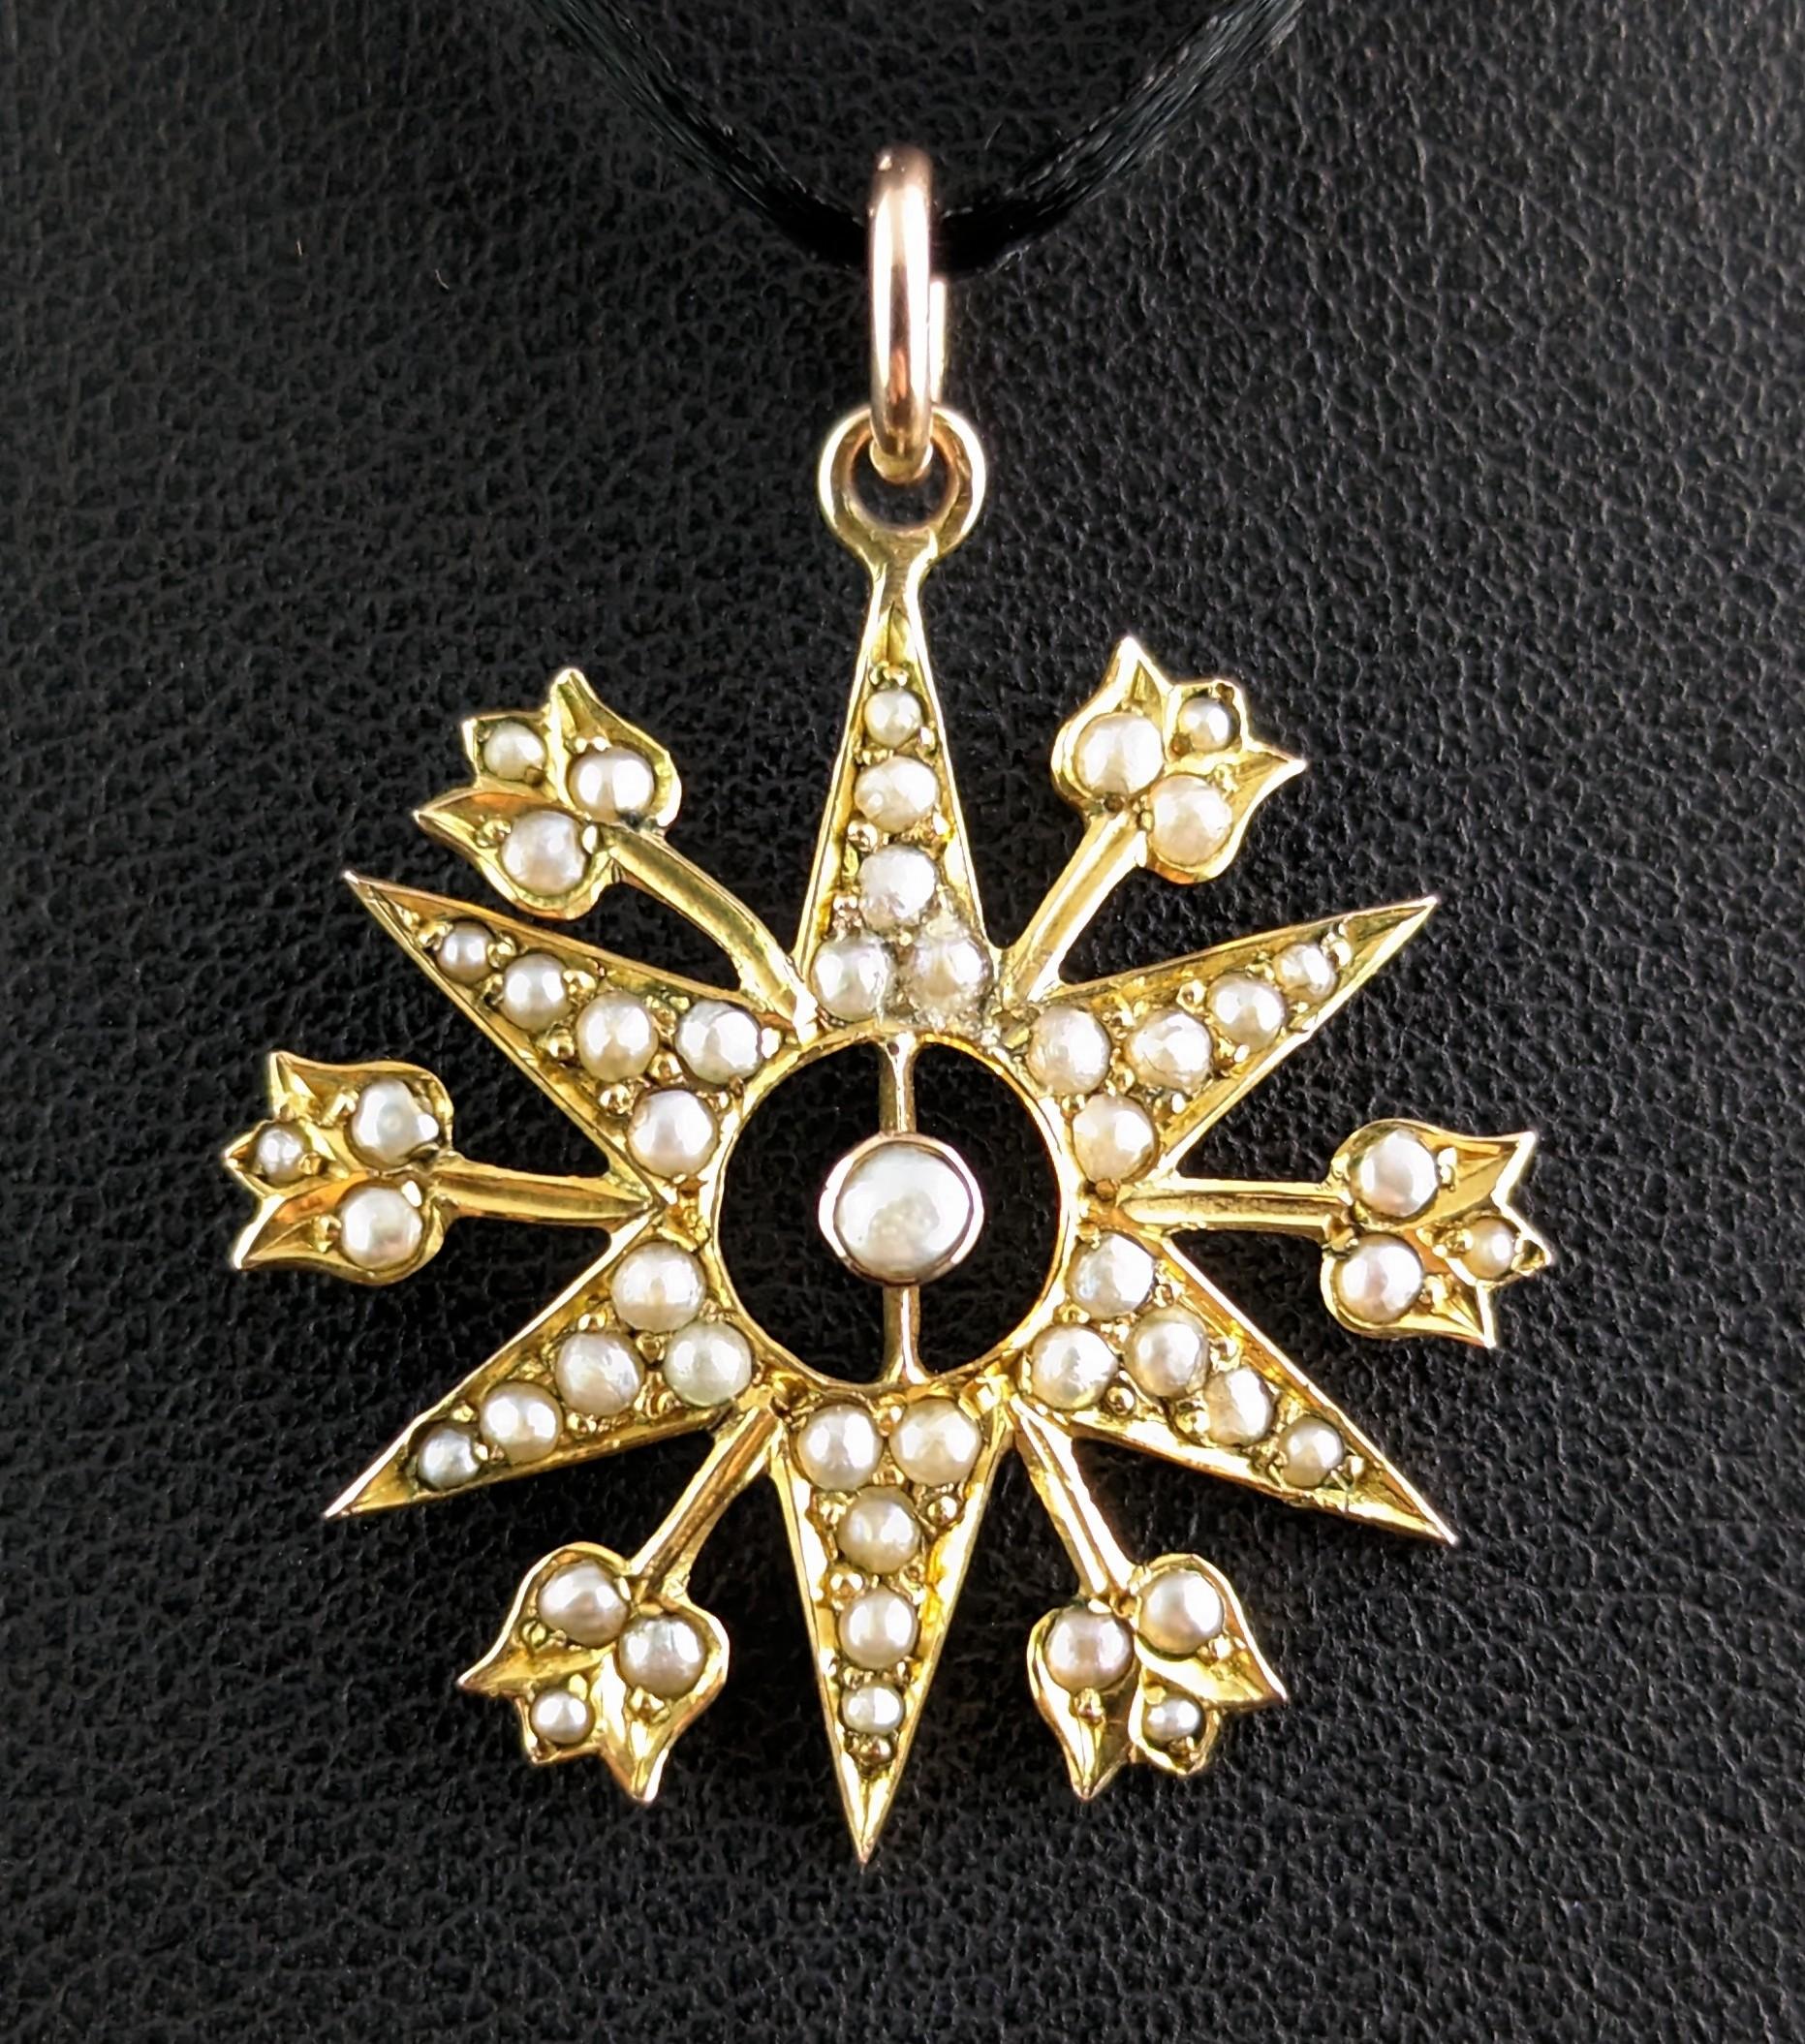 Celestial jewellery pieces like this antique 9kt gold and Pearl star pendant just never go out of style!

Stars and celestial jewels have a timeless allure that just keeps on going and they are as wearable today as they were then.

This beautiful